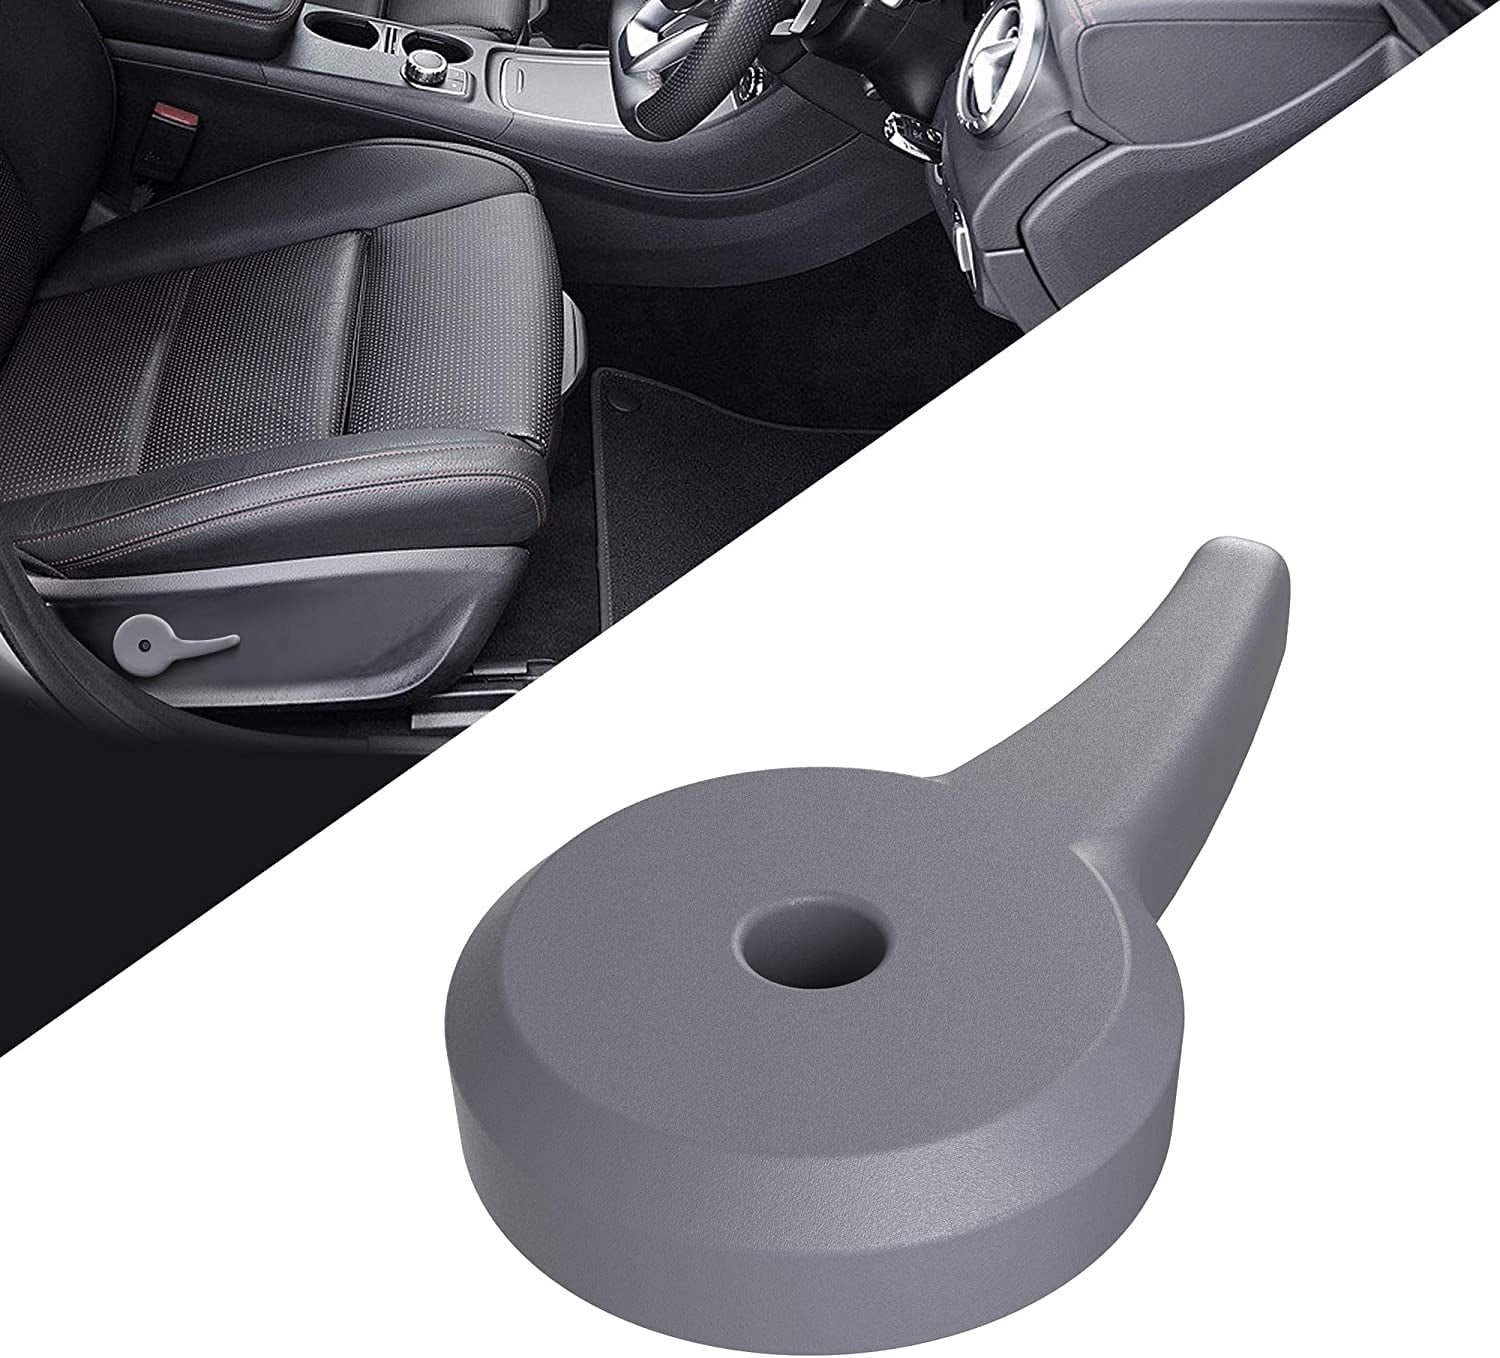 Gray VOFONO Seat Recliner Handle Drivers Side Fit for Chevrolet Silverado 2003-2006/ GMC Sierra w/Split Bench Drivers Side Shale Lever 88977075 Single Front Seat Recliner Adjuster handle 